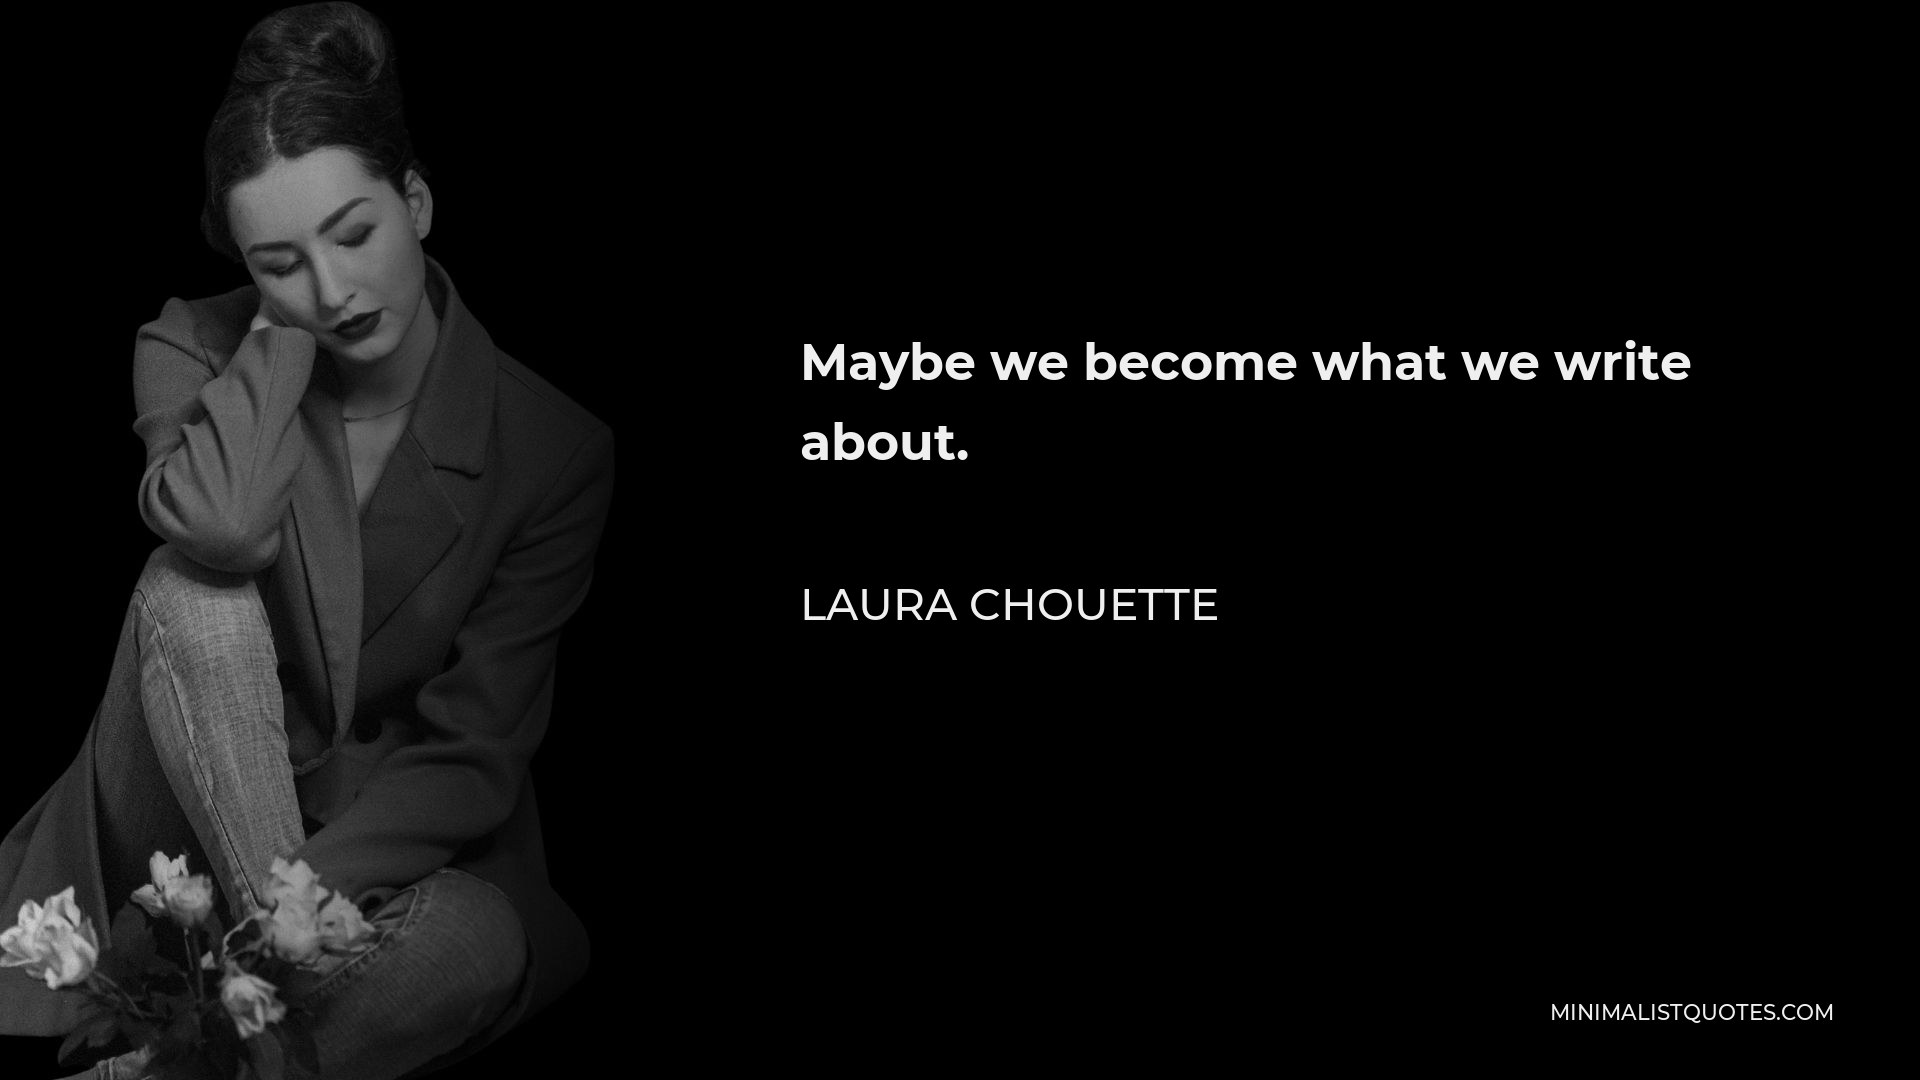 Laura Chouette Quote - Maybe we become what we write about.